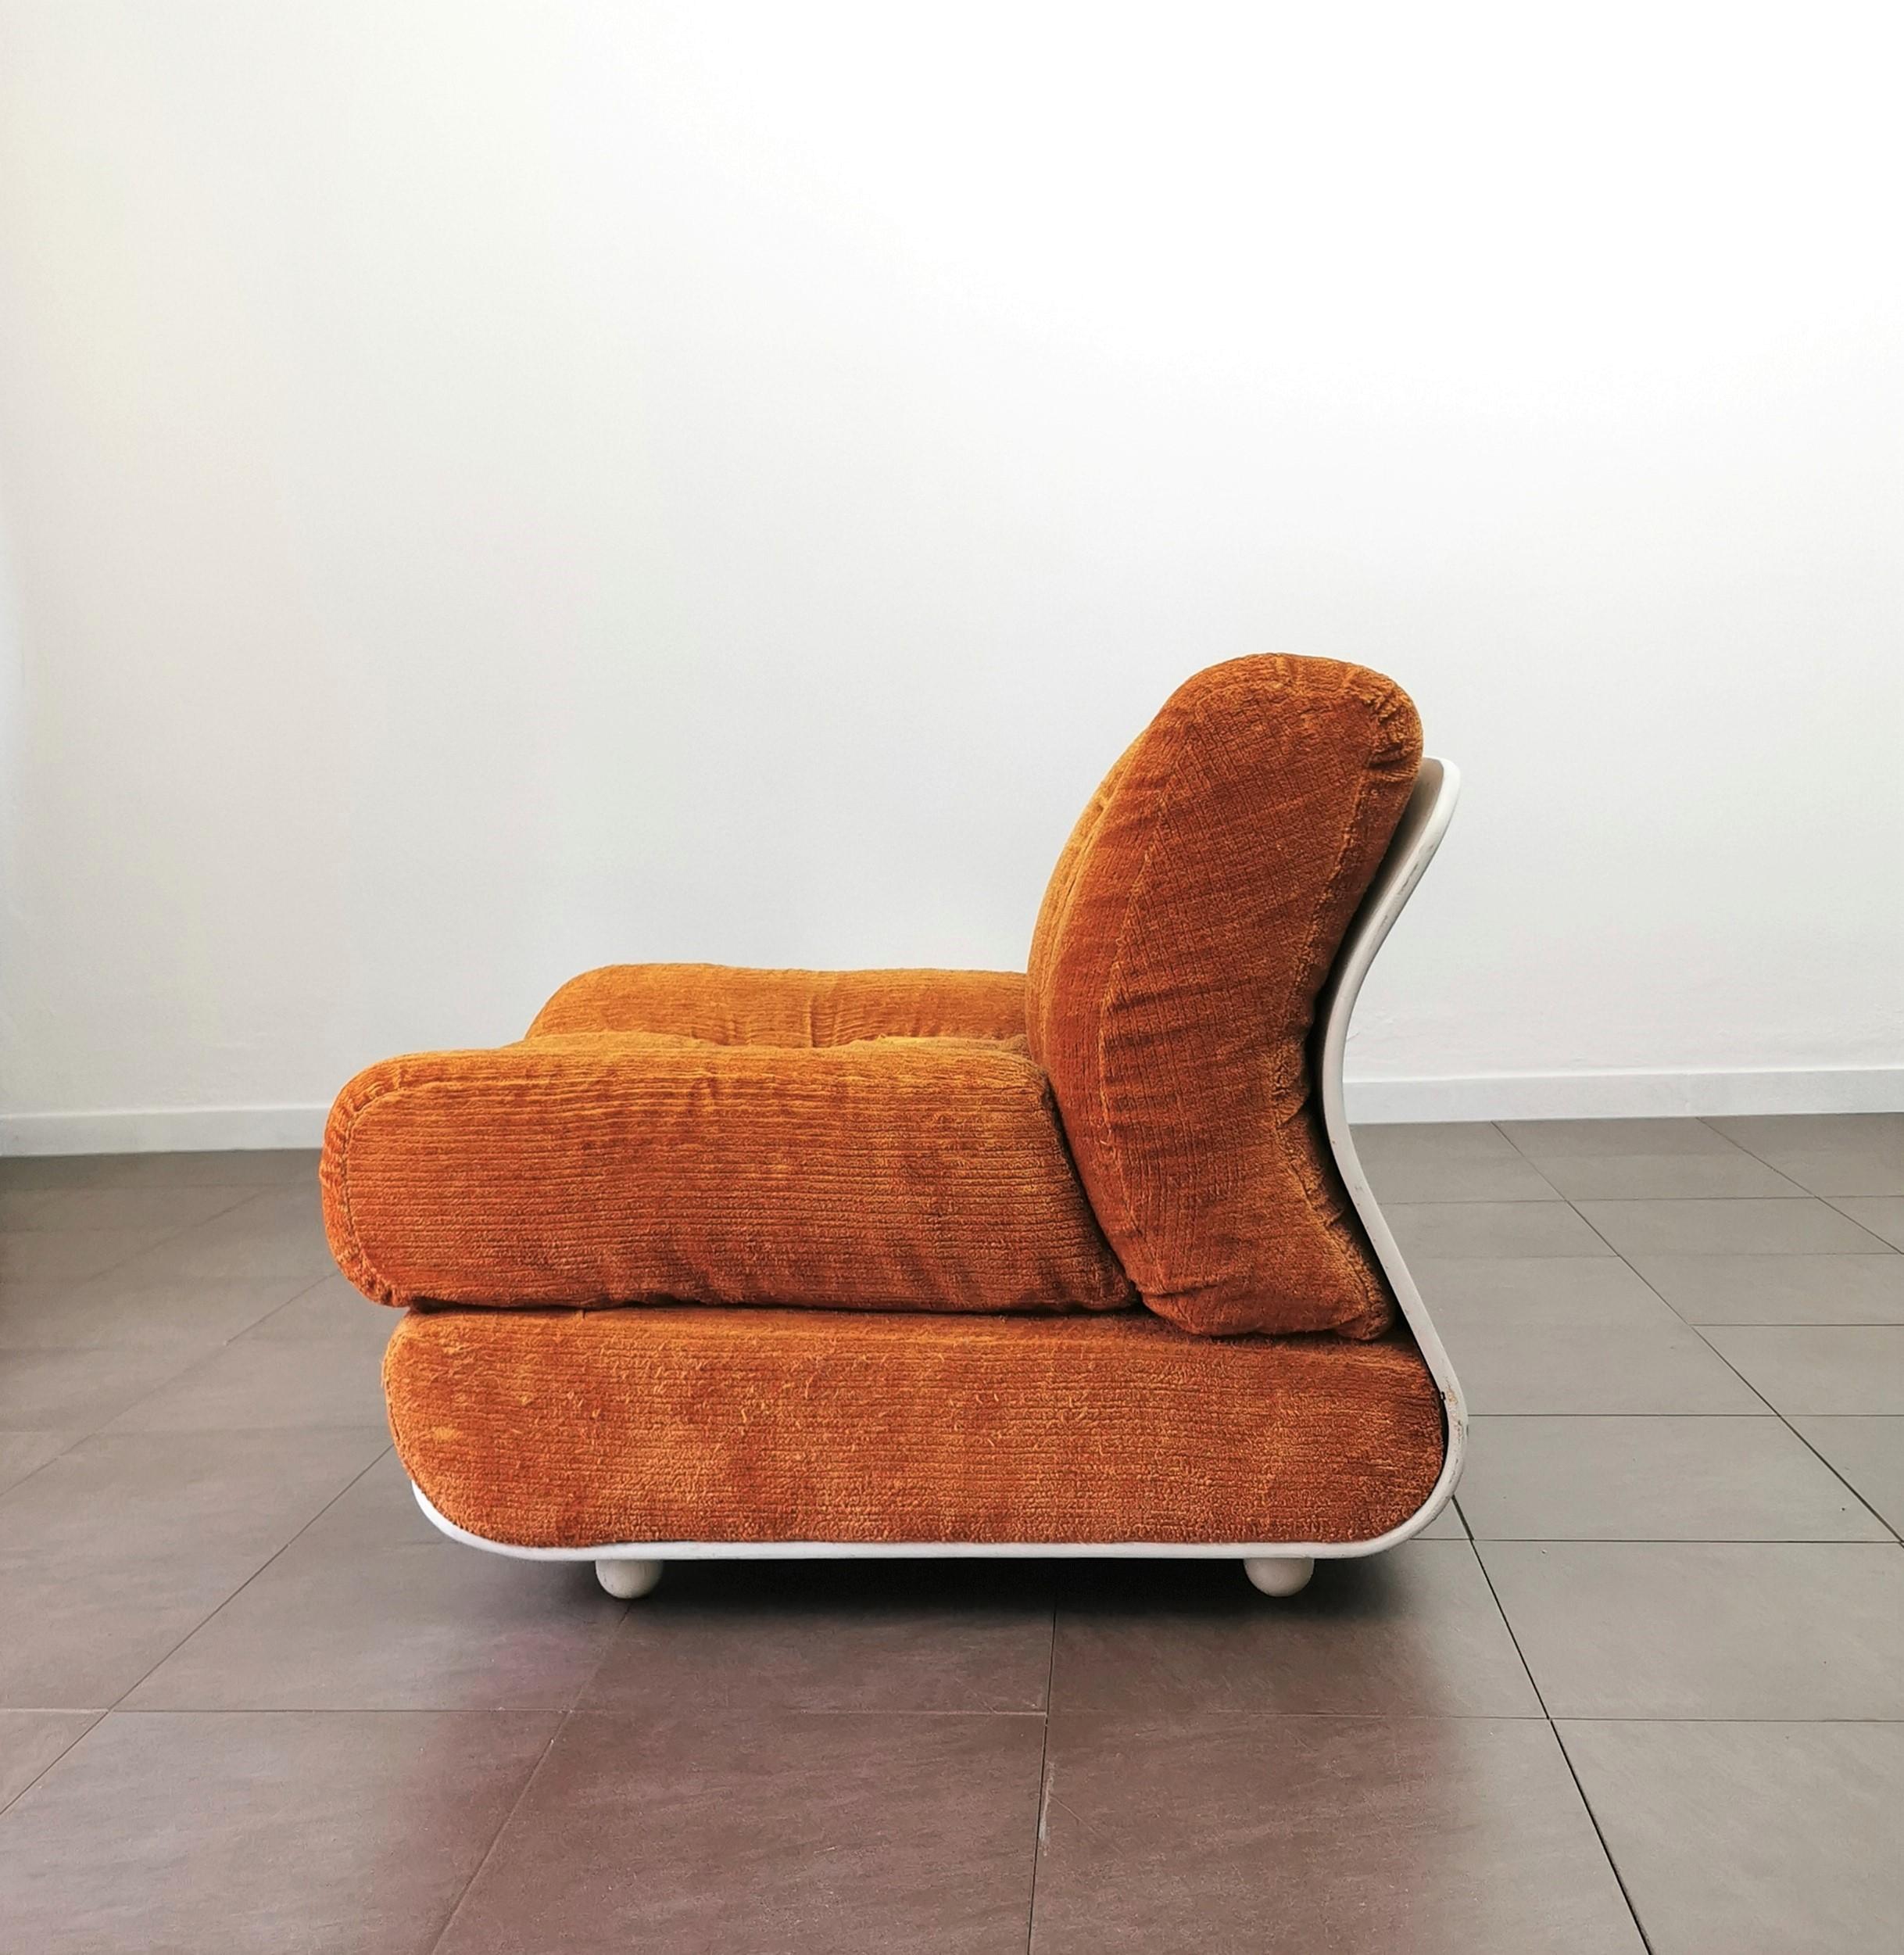 Armchair of considerable size produced in Italy in the 70s.
The armchair with its curvilinear shapes has been made with a white enamelled solid wood structure and cushions covered in wide corduroy in the shade of orange.